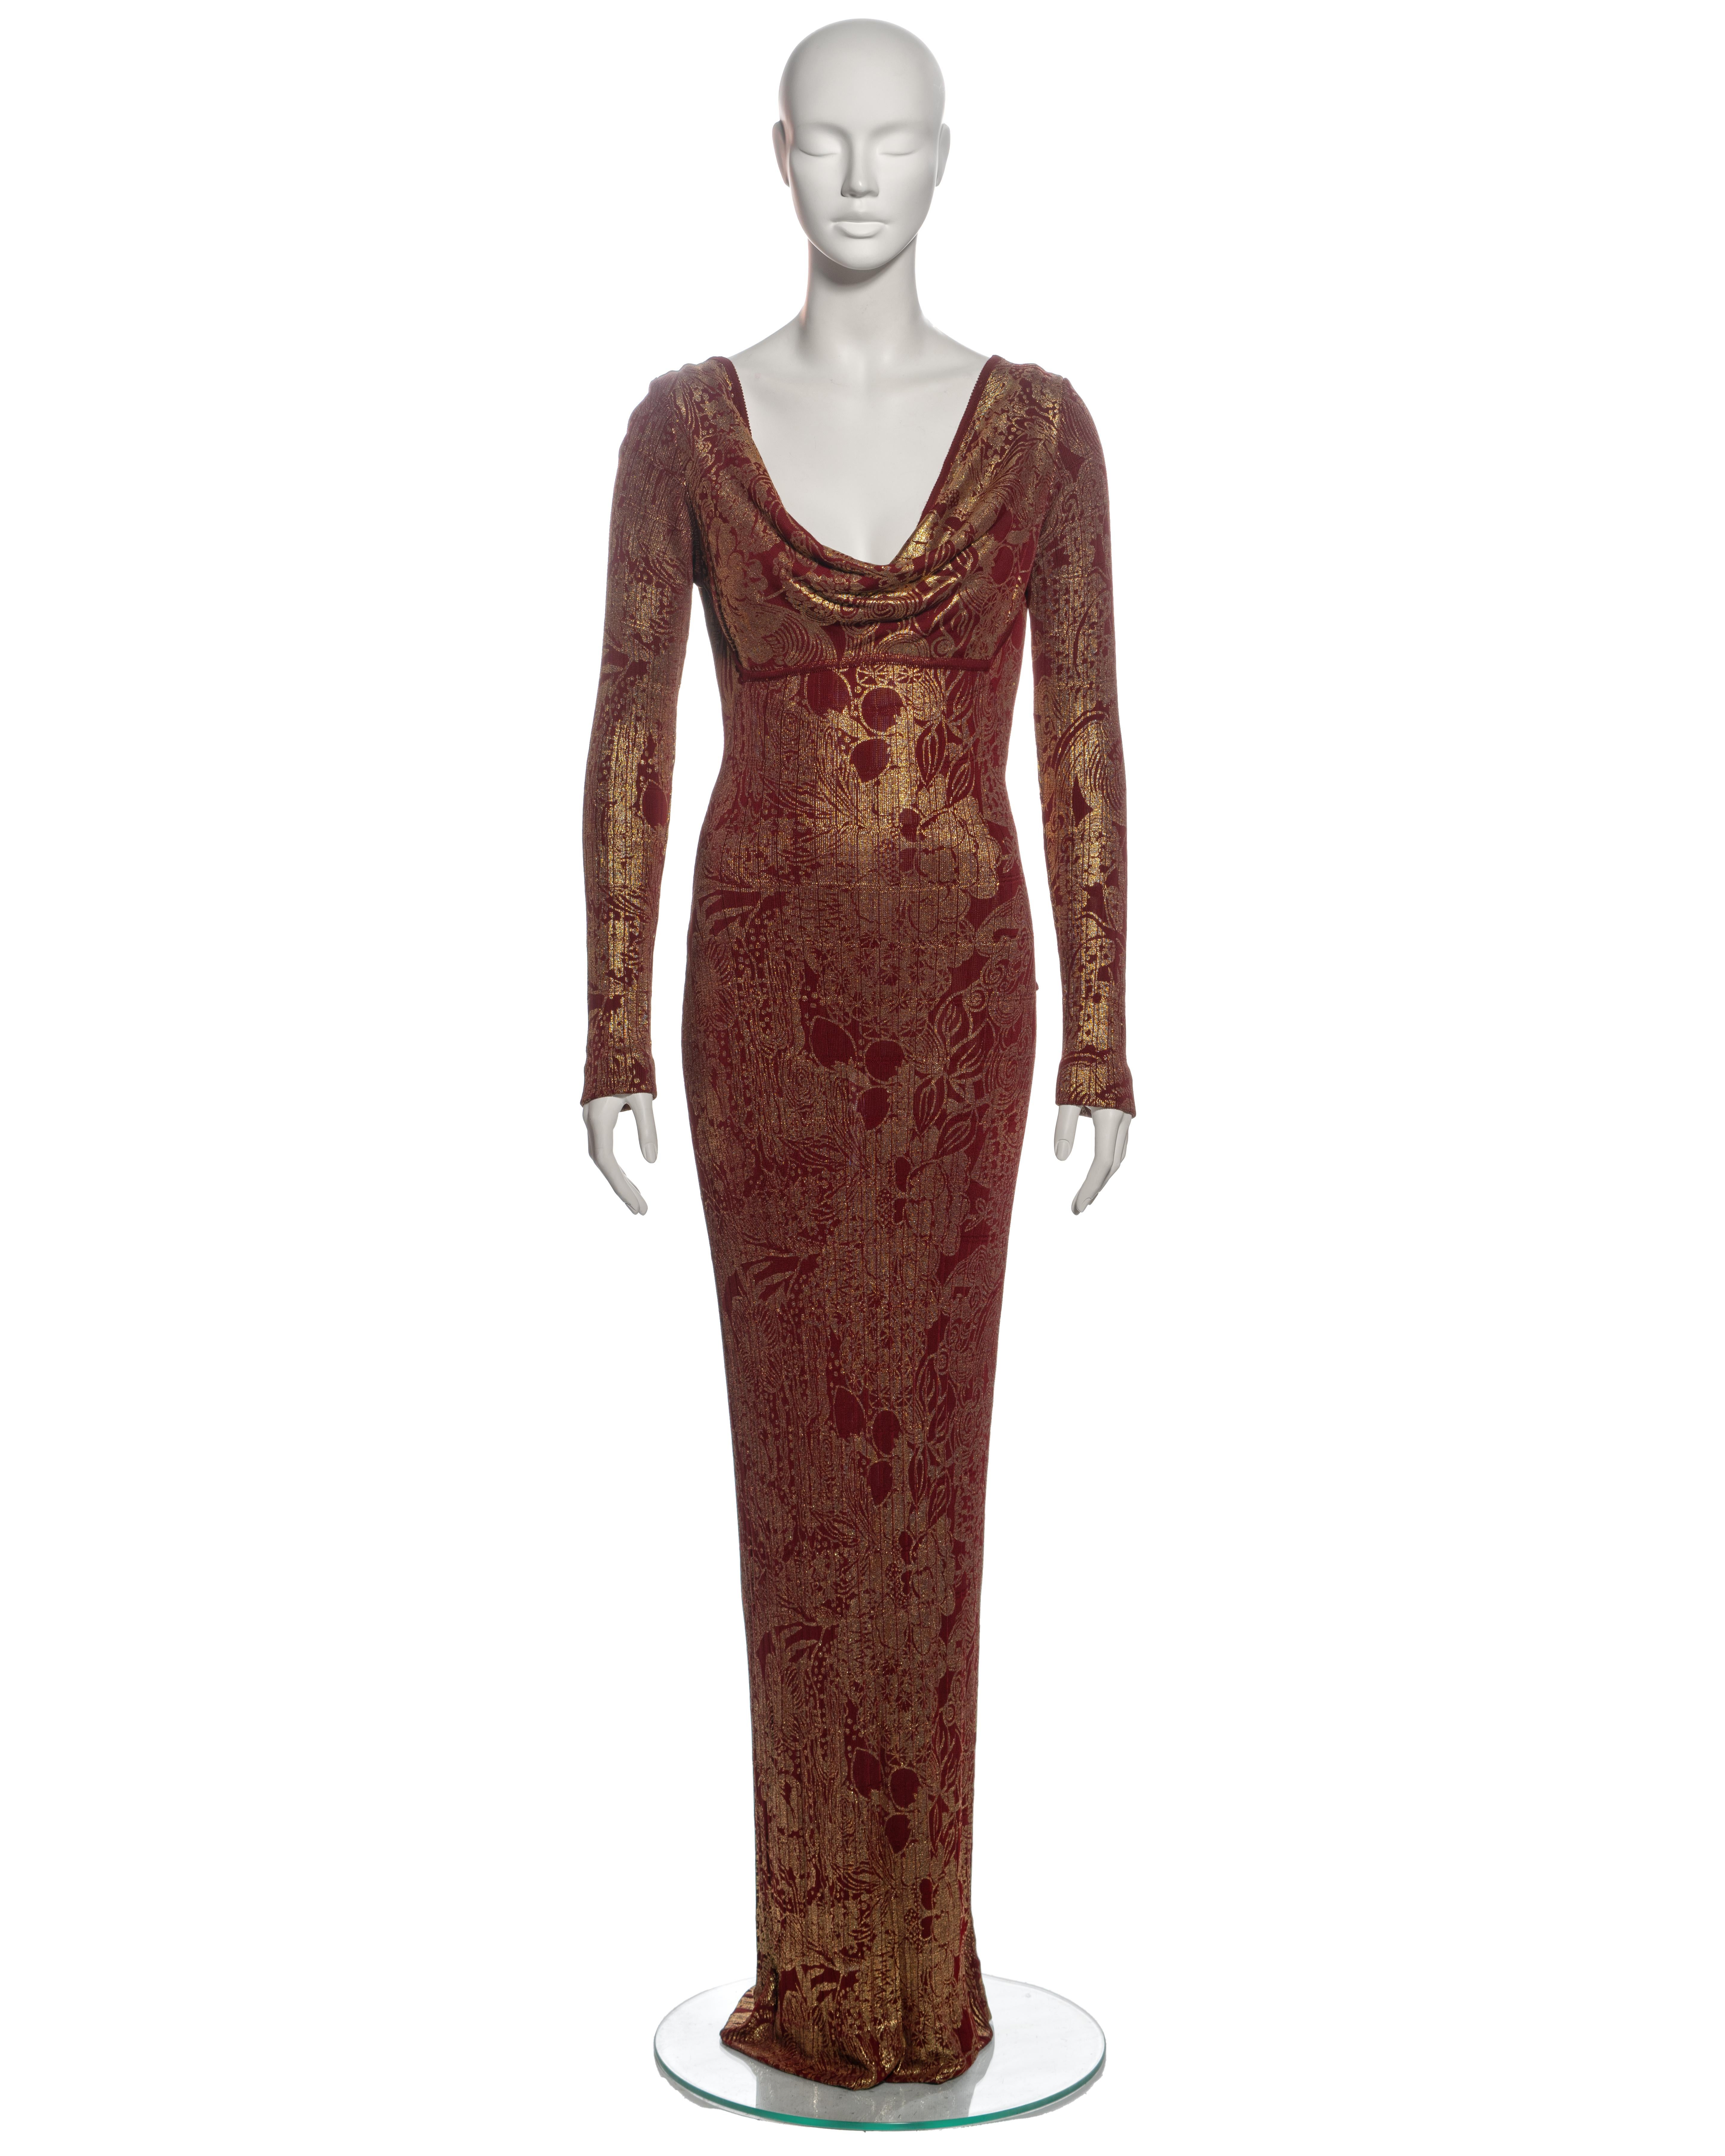 ▪ Archival John Galliano evening dress
▪ Fall-Winter 1998
▪ Sold by One of a Kind Archive
▪ Bordeaux red viscose ribbed knit 
▪ Gold foil floral print 
▪ Draped cowl neckline
▪ Low back accentuated with draped cowls
▪ Long fitted sleeves
▪ Floor